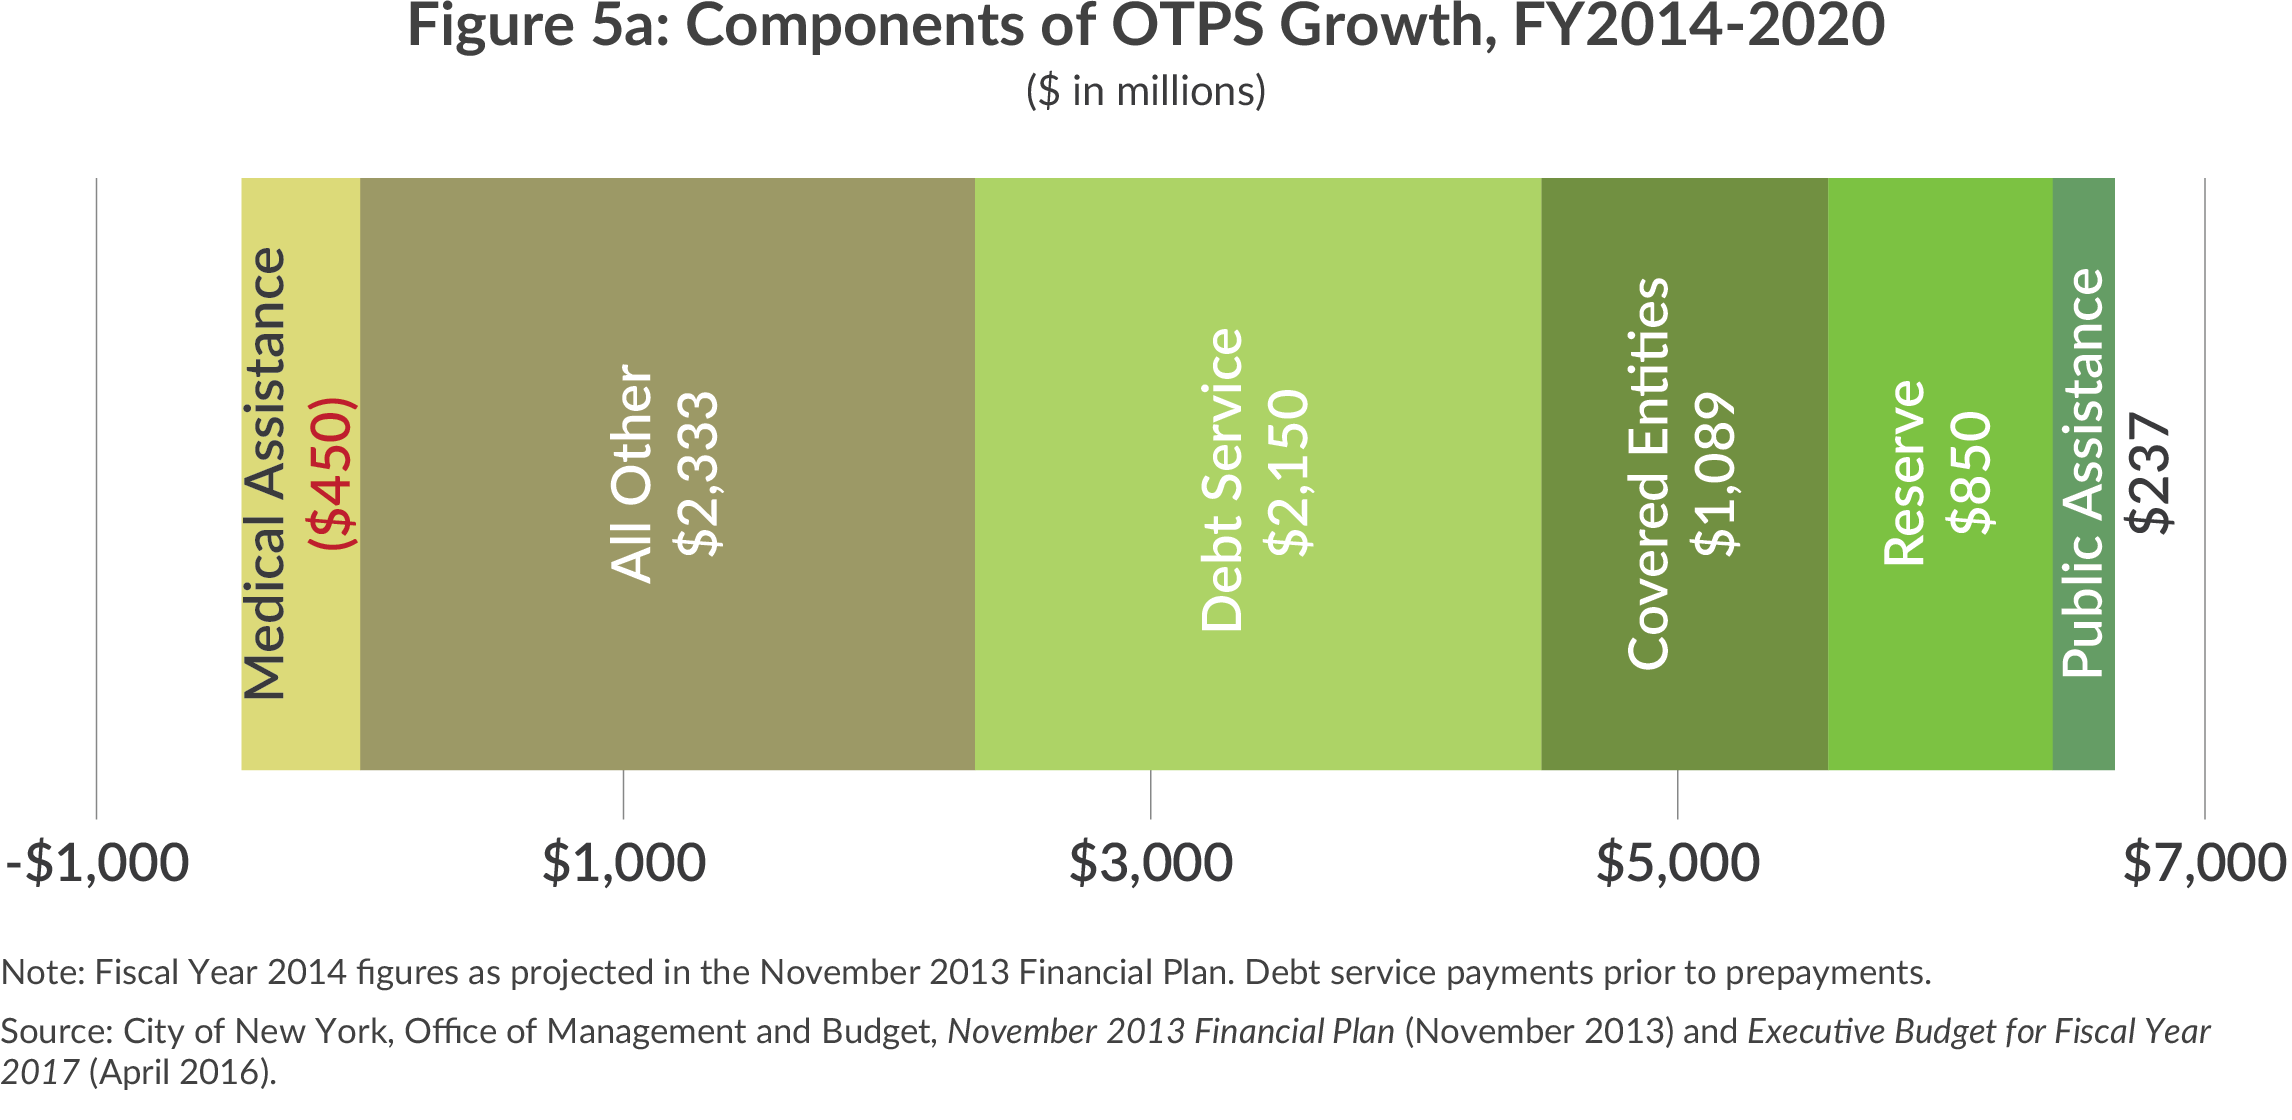 Other than personal services expenditure growth, NYC budget